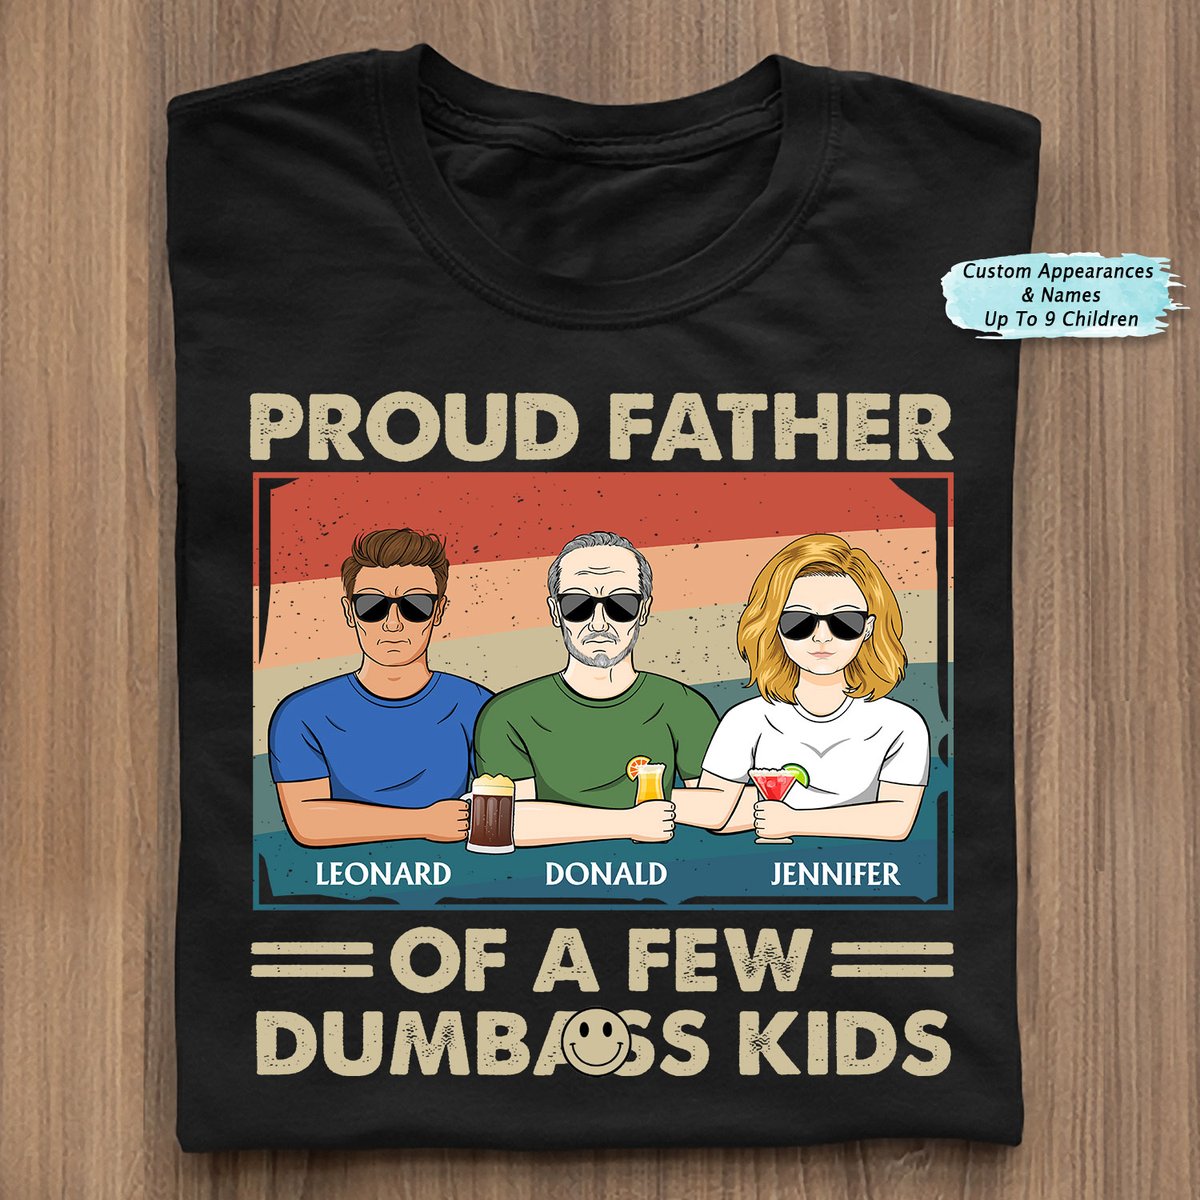 Because My Proud Dad Deserves This T-Shirt

👉 Order here: wanderprints.com/ak982nah3096-t…
✈ Worldwide Shipping!

#wanderprints #tshirt #giftforhim #dad #father #fathersday